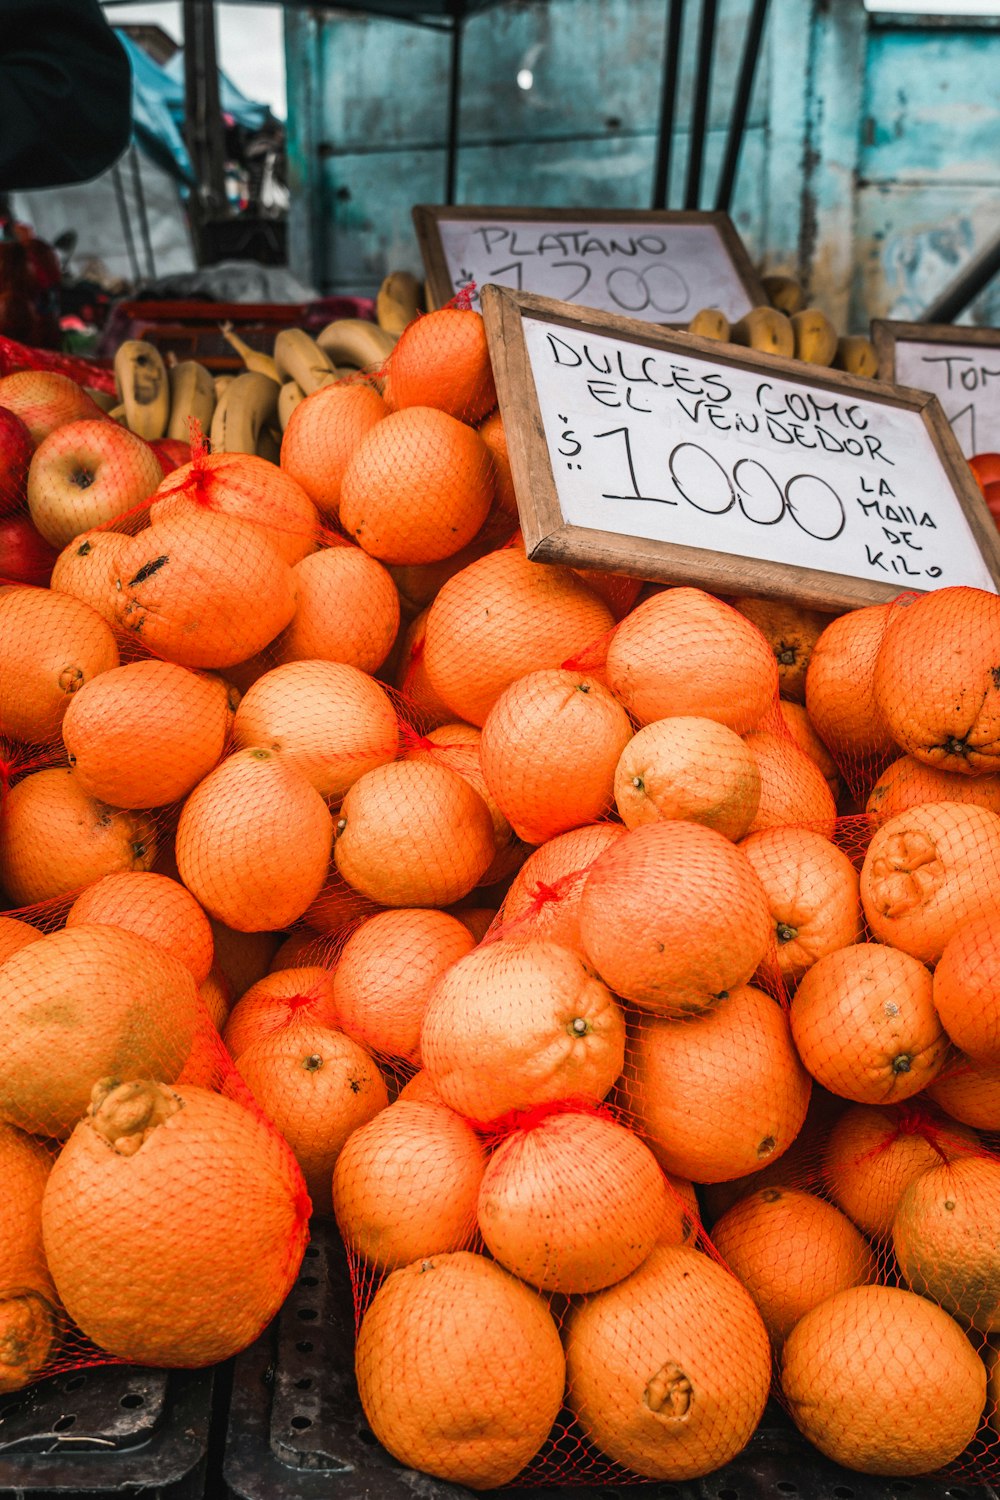 a pile of oranges for sale at a market